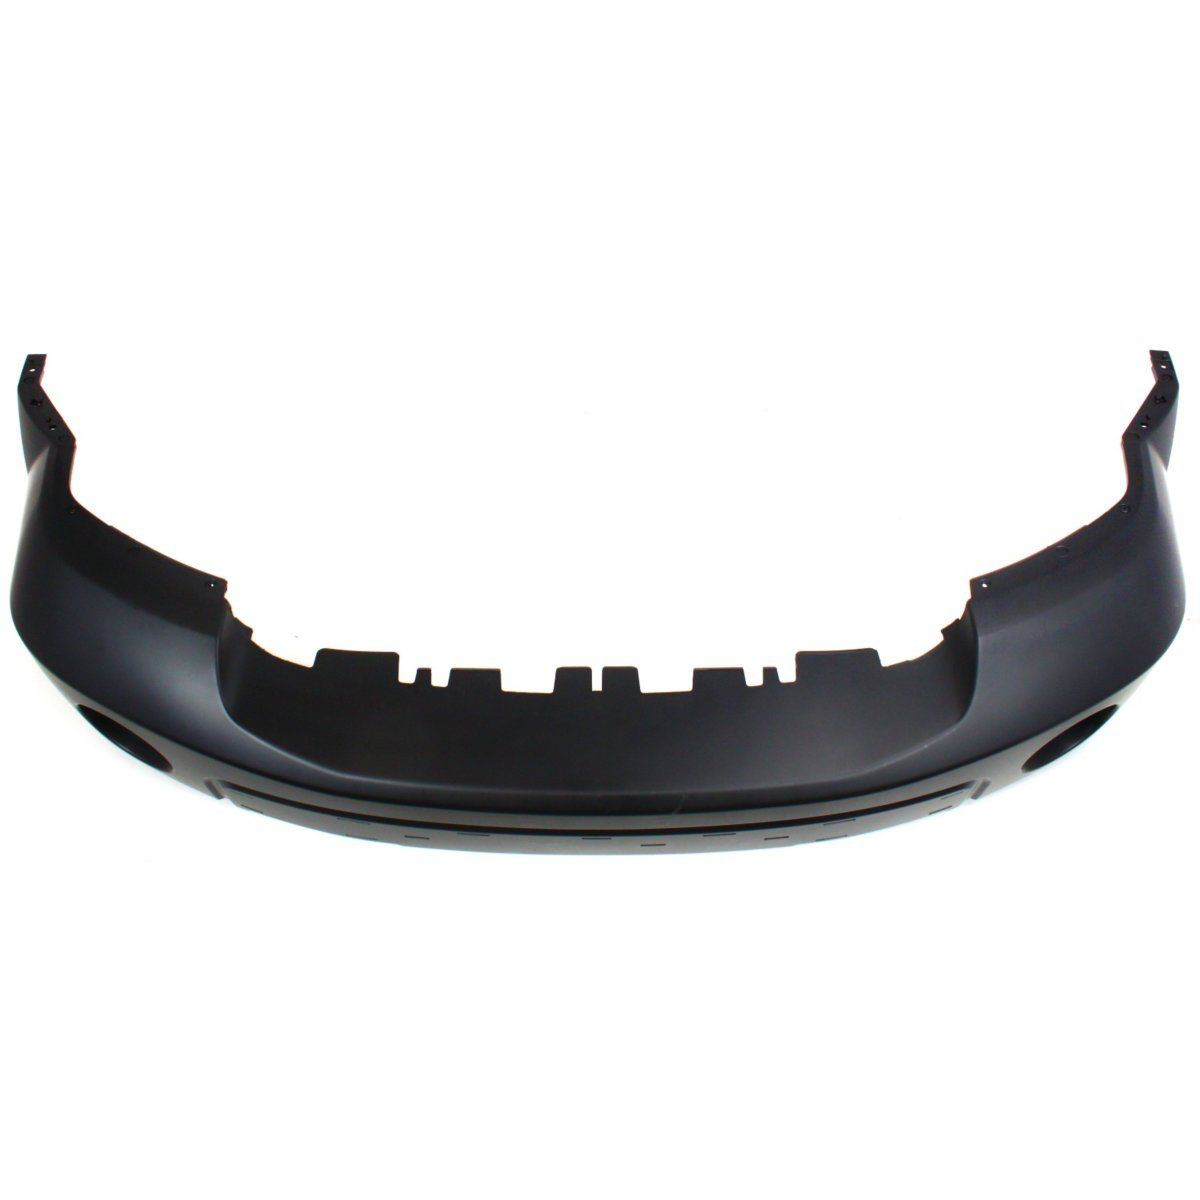 2007-2009 DODGE DURANGO Front Bumper Cover w/bright insert  w/o tow hooks Painted to Match